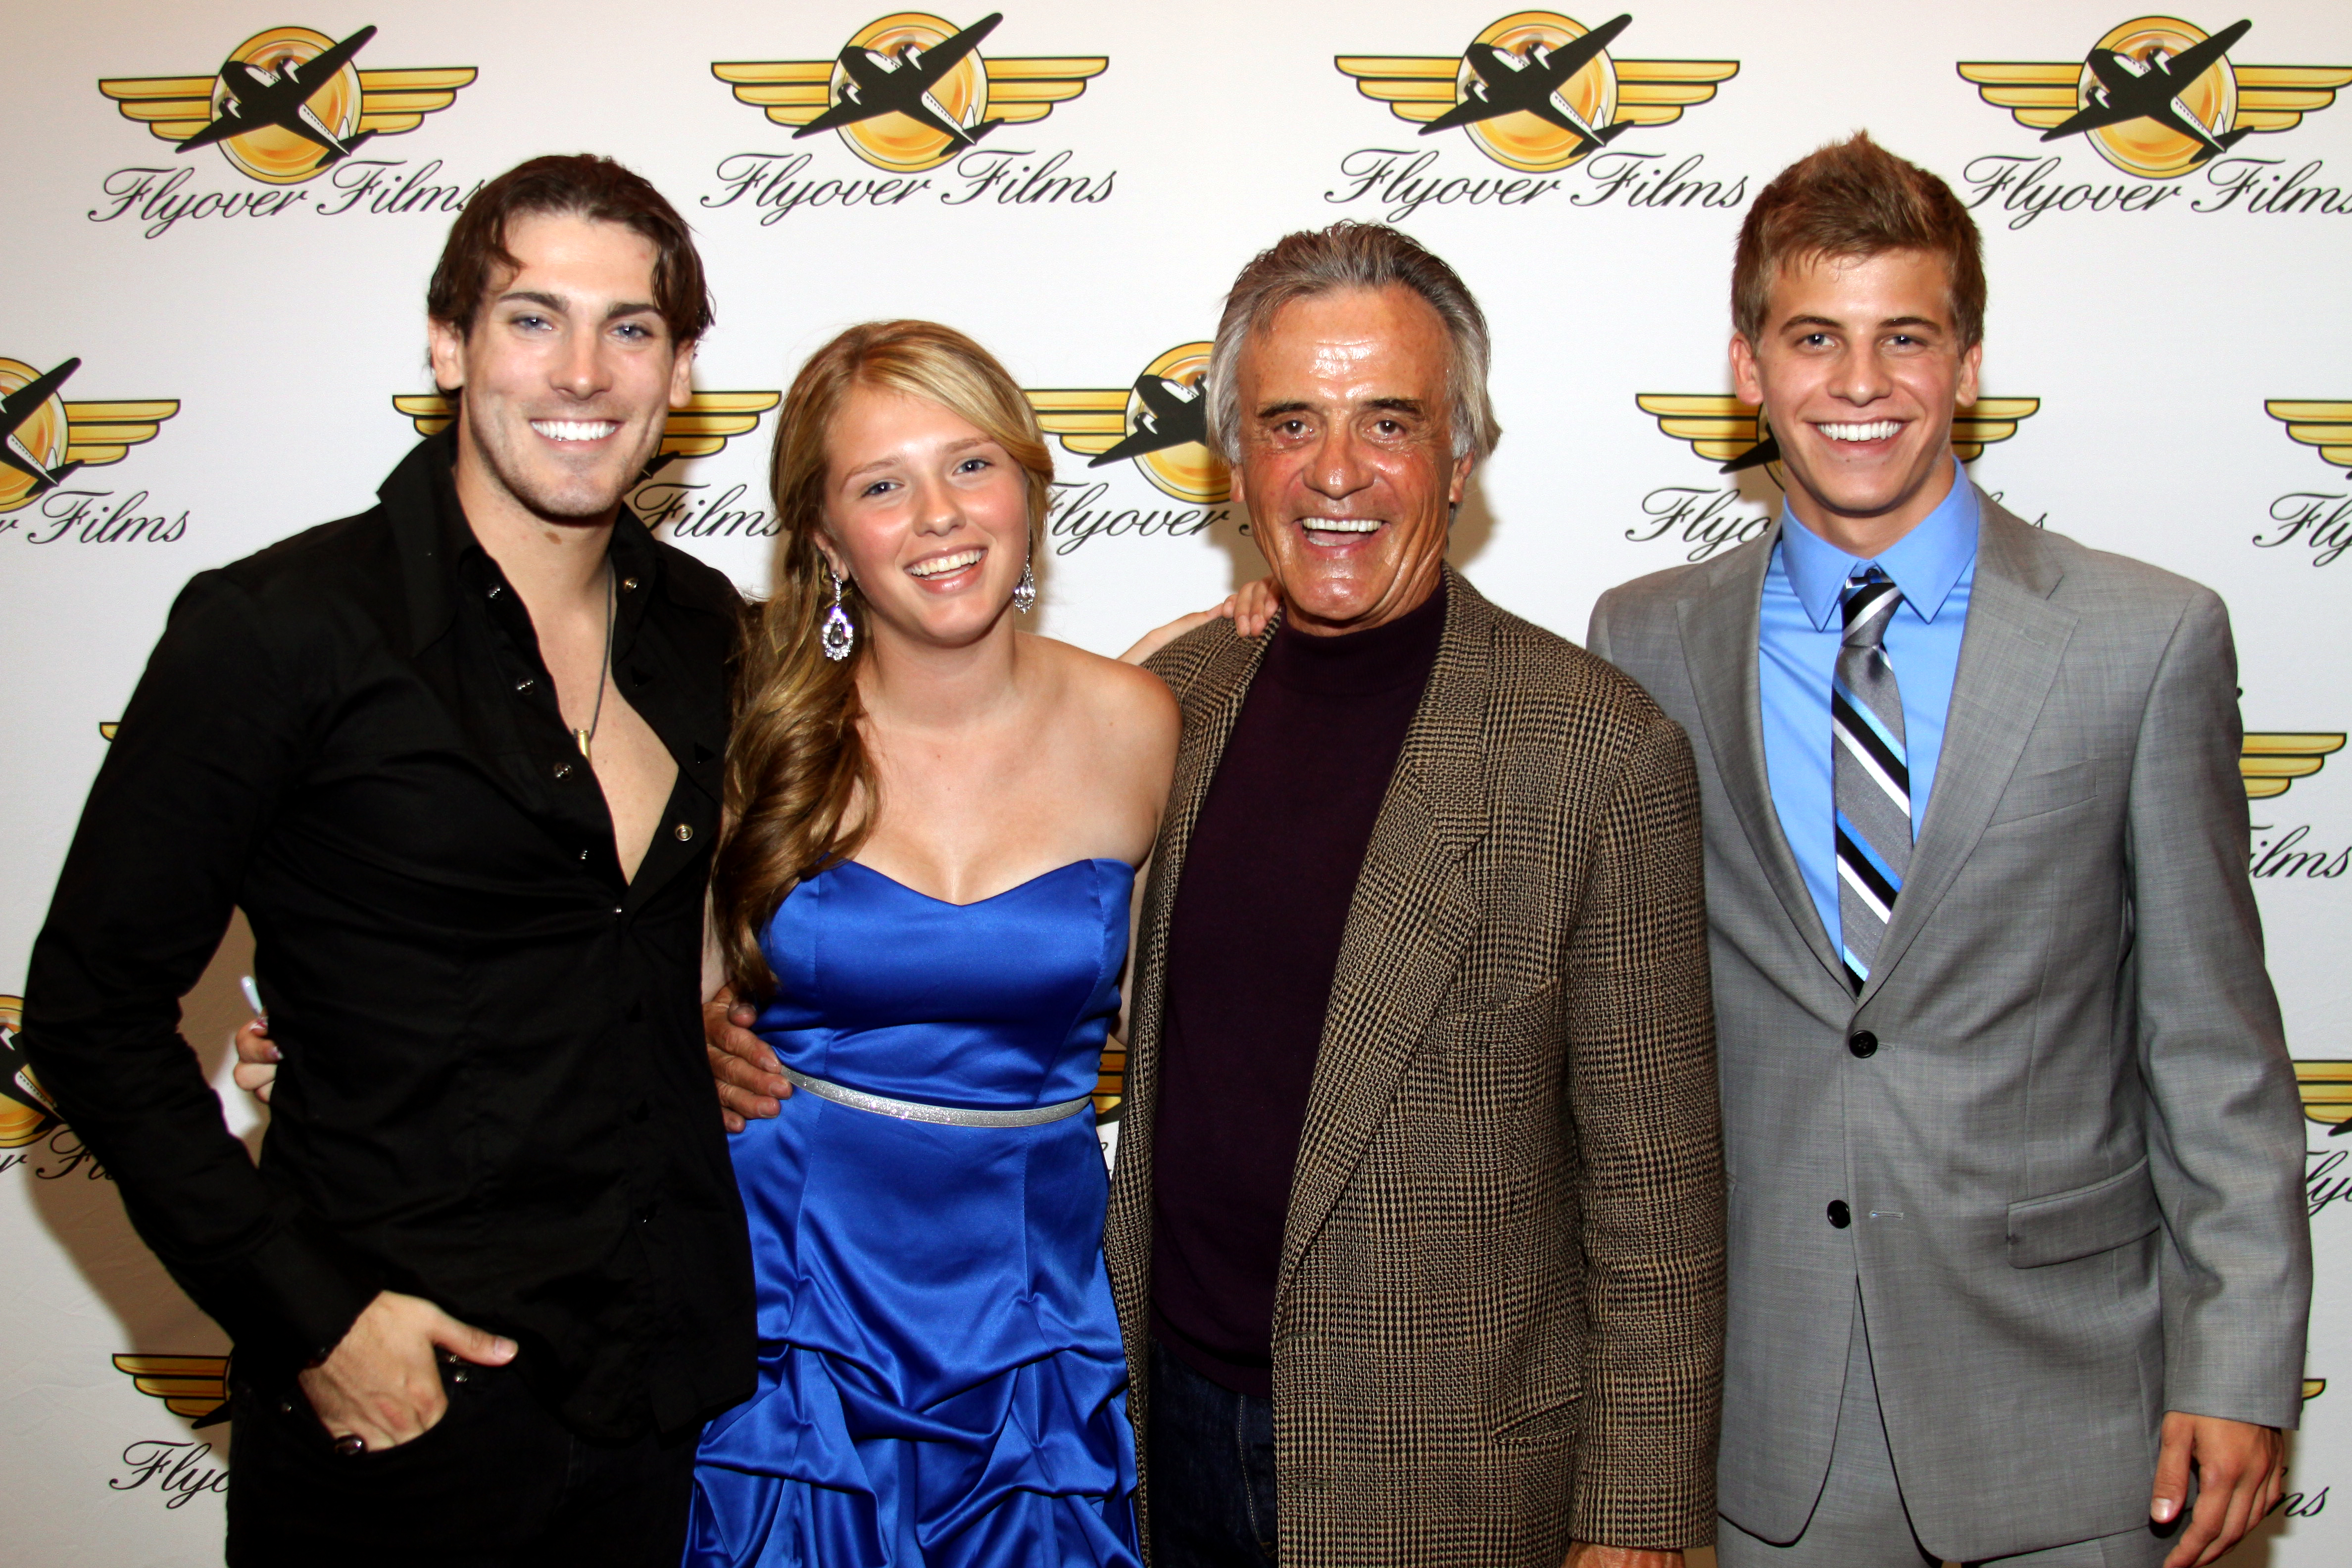 Michael Allen, Emily Capehart, Terry Kiser and Barrett Carnahan at the premiere of 